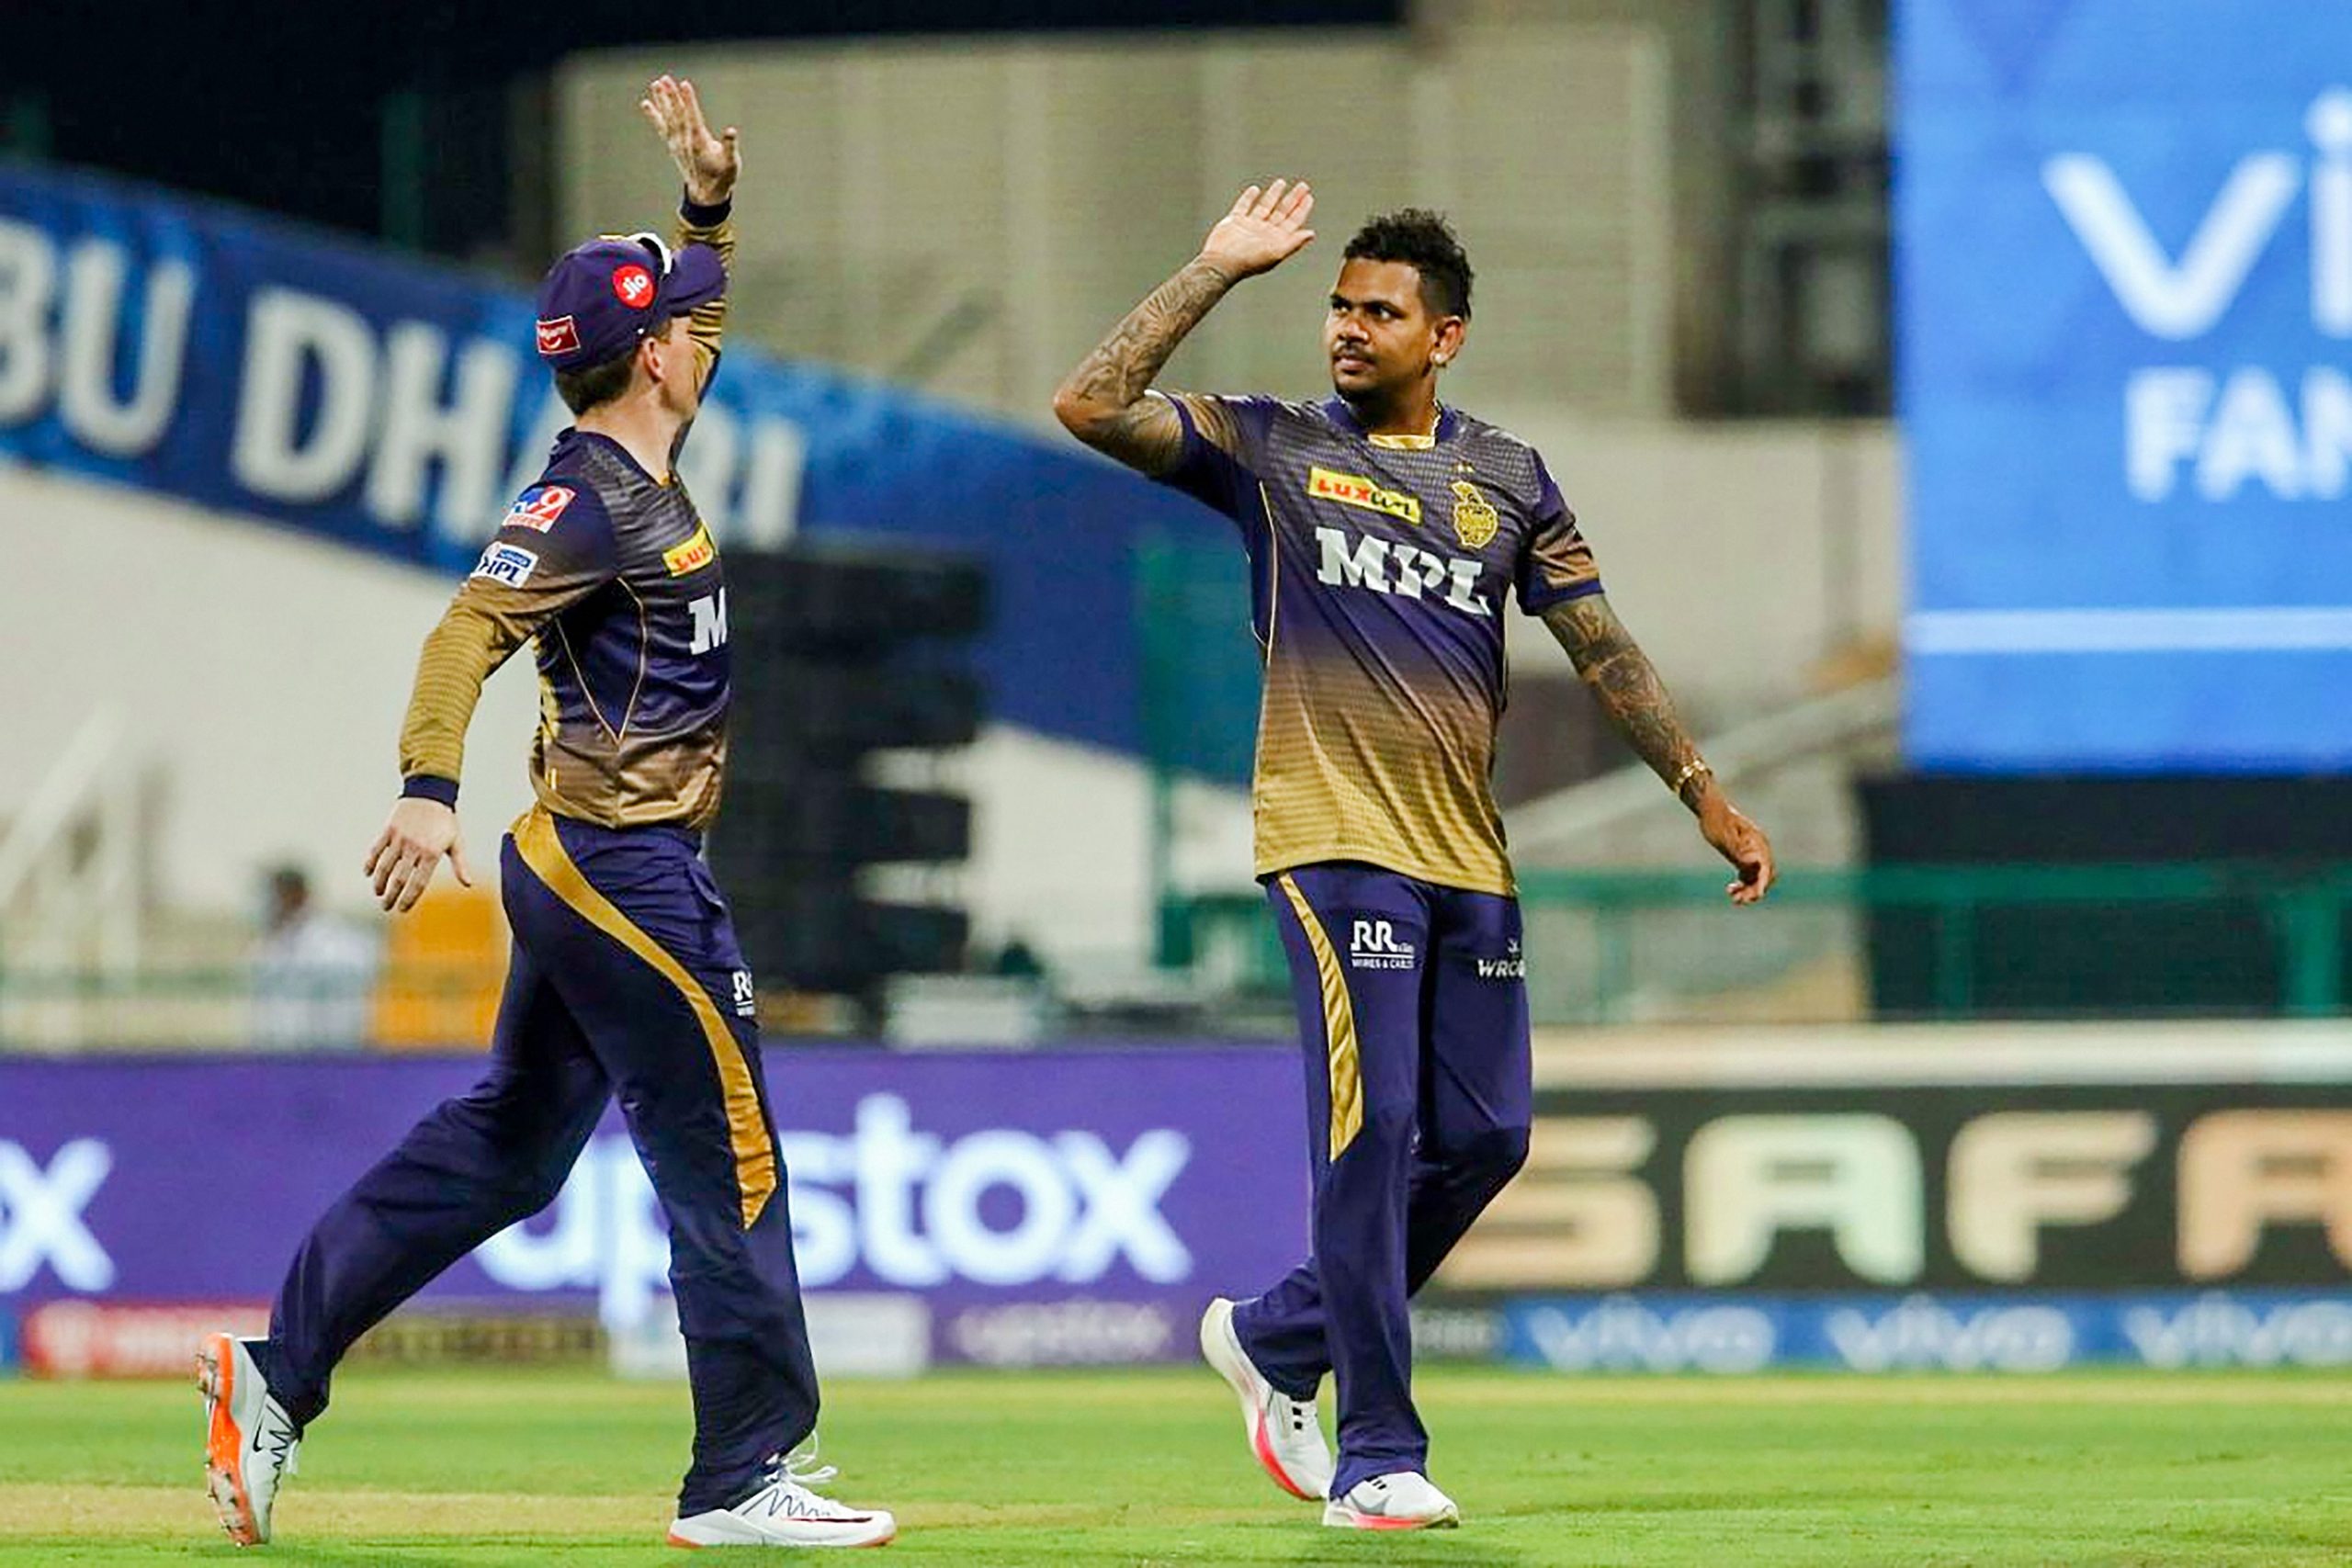 IPL 2021: KKR fields vs DC; Southee replaces Russell, Steve Smith in for Delhi